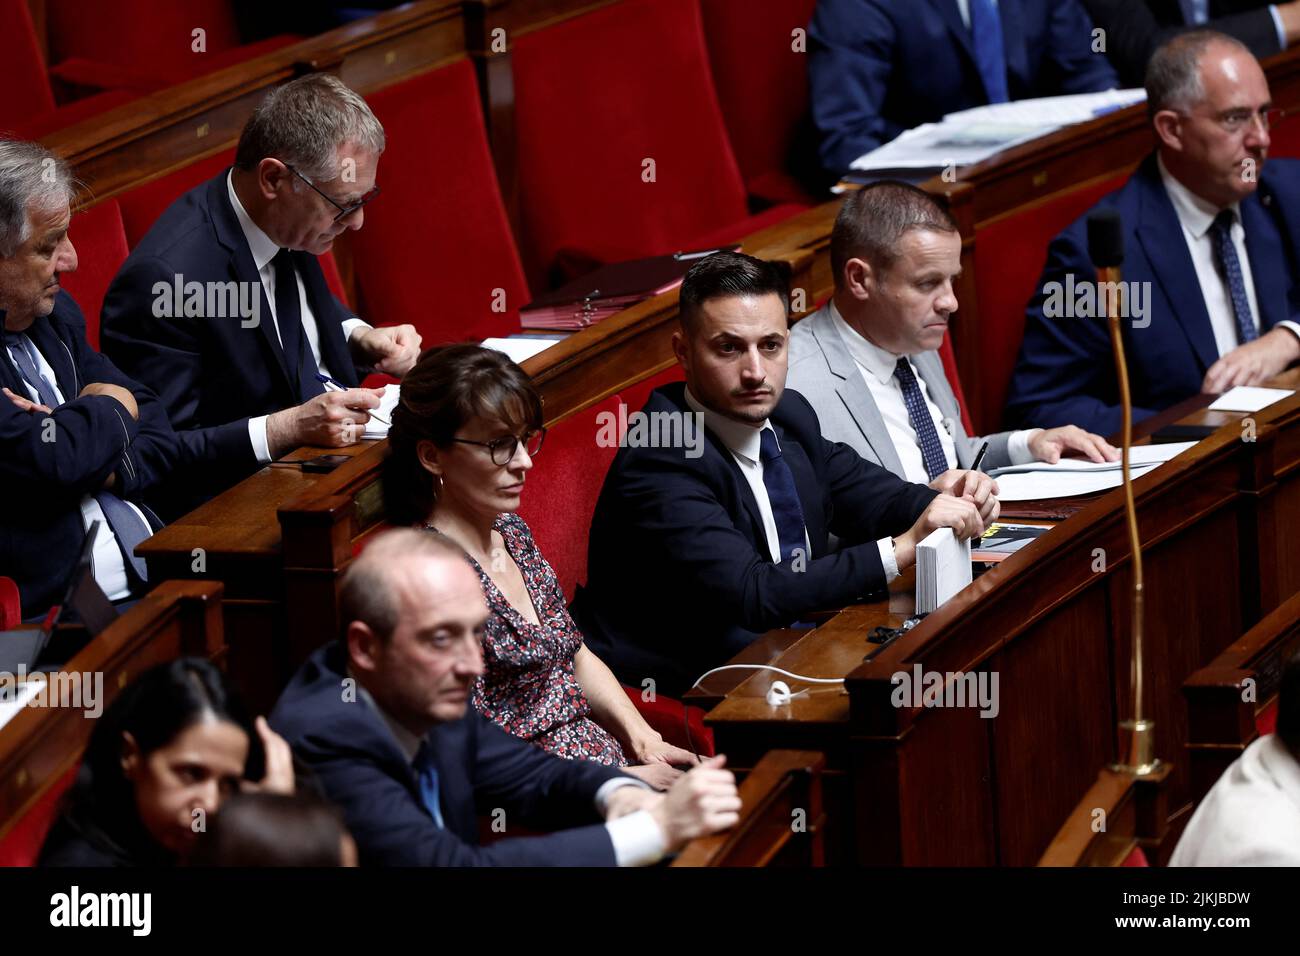 Member of parliament Maxime Minot attends the questions to the government session at the National Assembly in Paris, France, August 2, 2022. REUTERS/Benoit Tessier Stock Photo